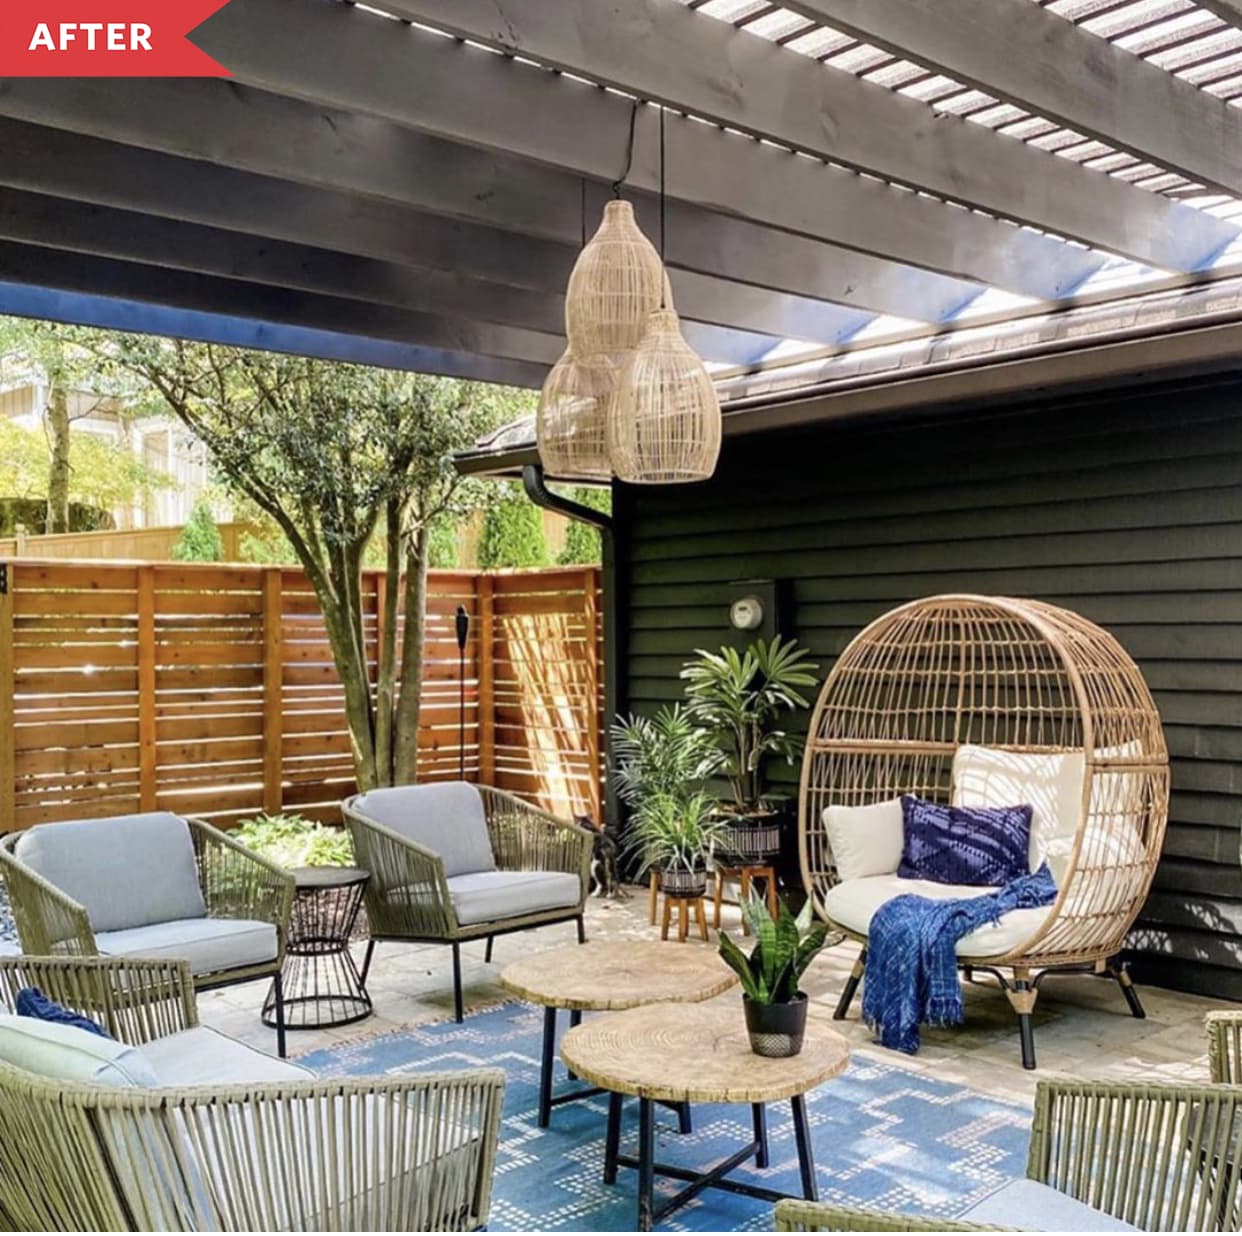 20 Best Patio Makeovers - Before & After Photos of Patio Remodels ...